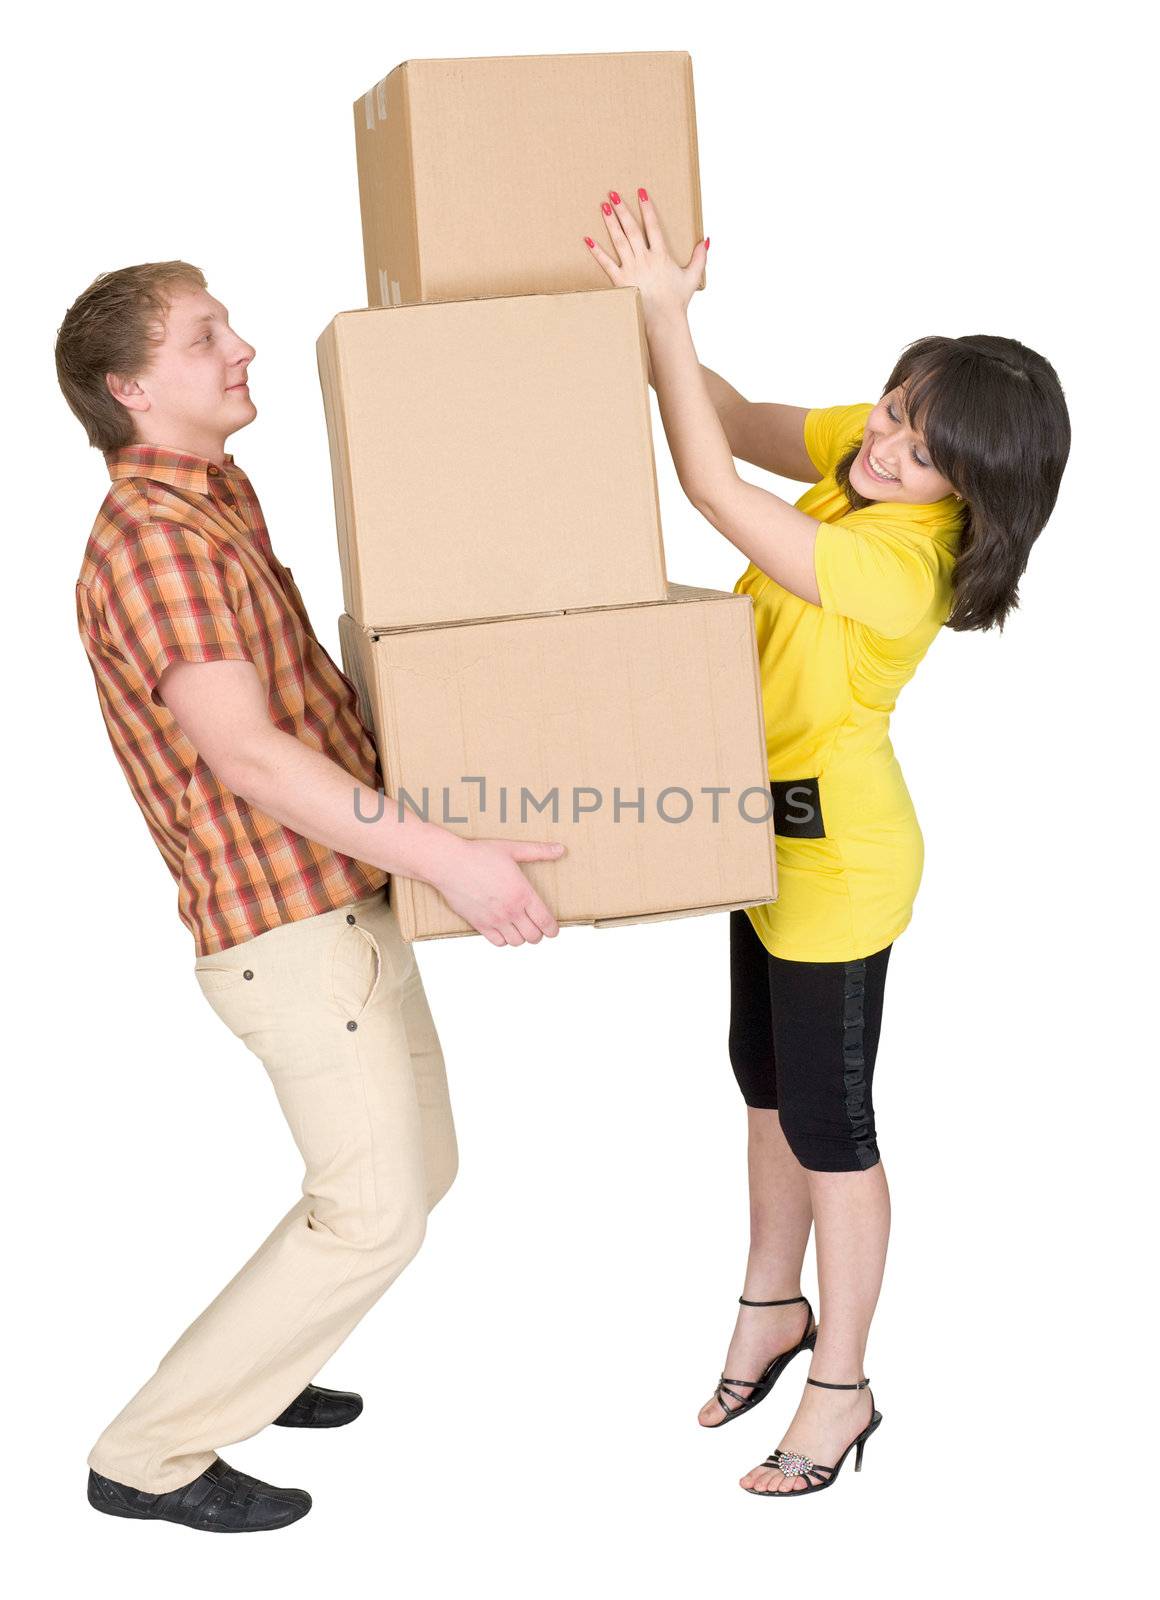 Girl loads the man with cardboard boxes by pzaxe